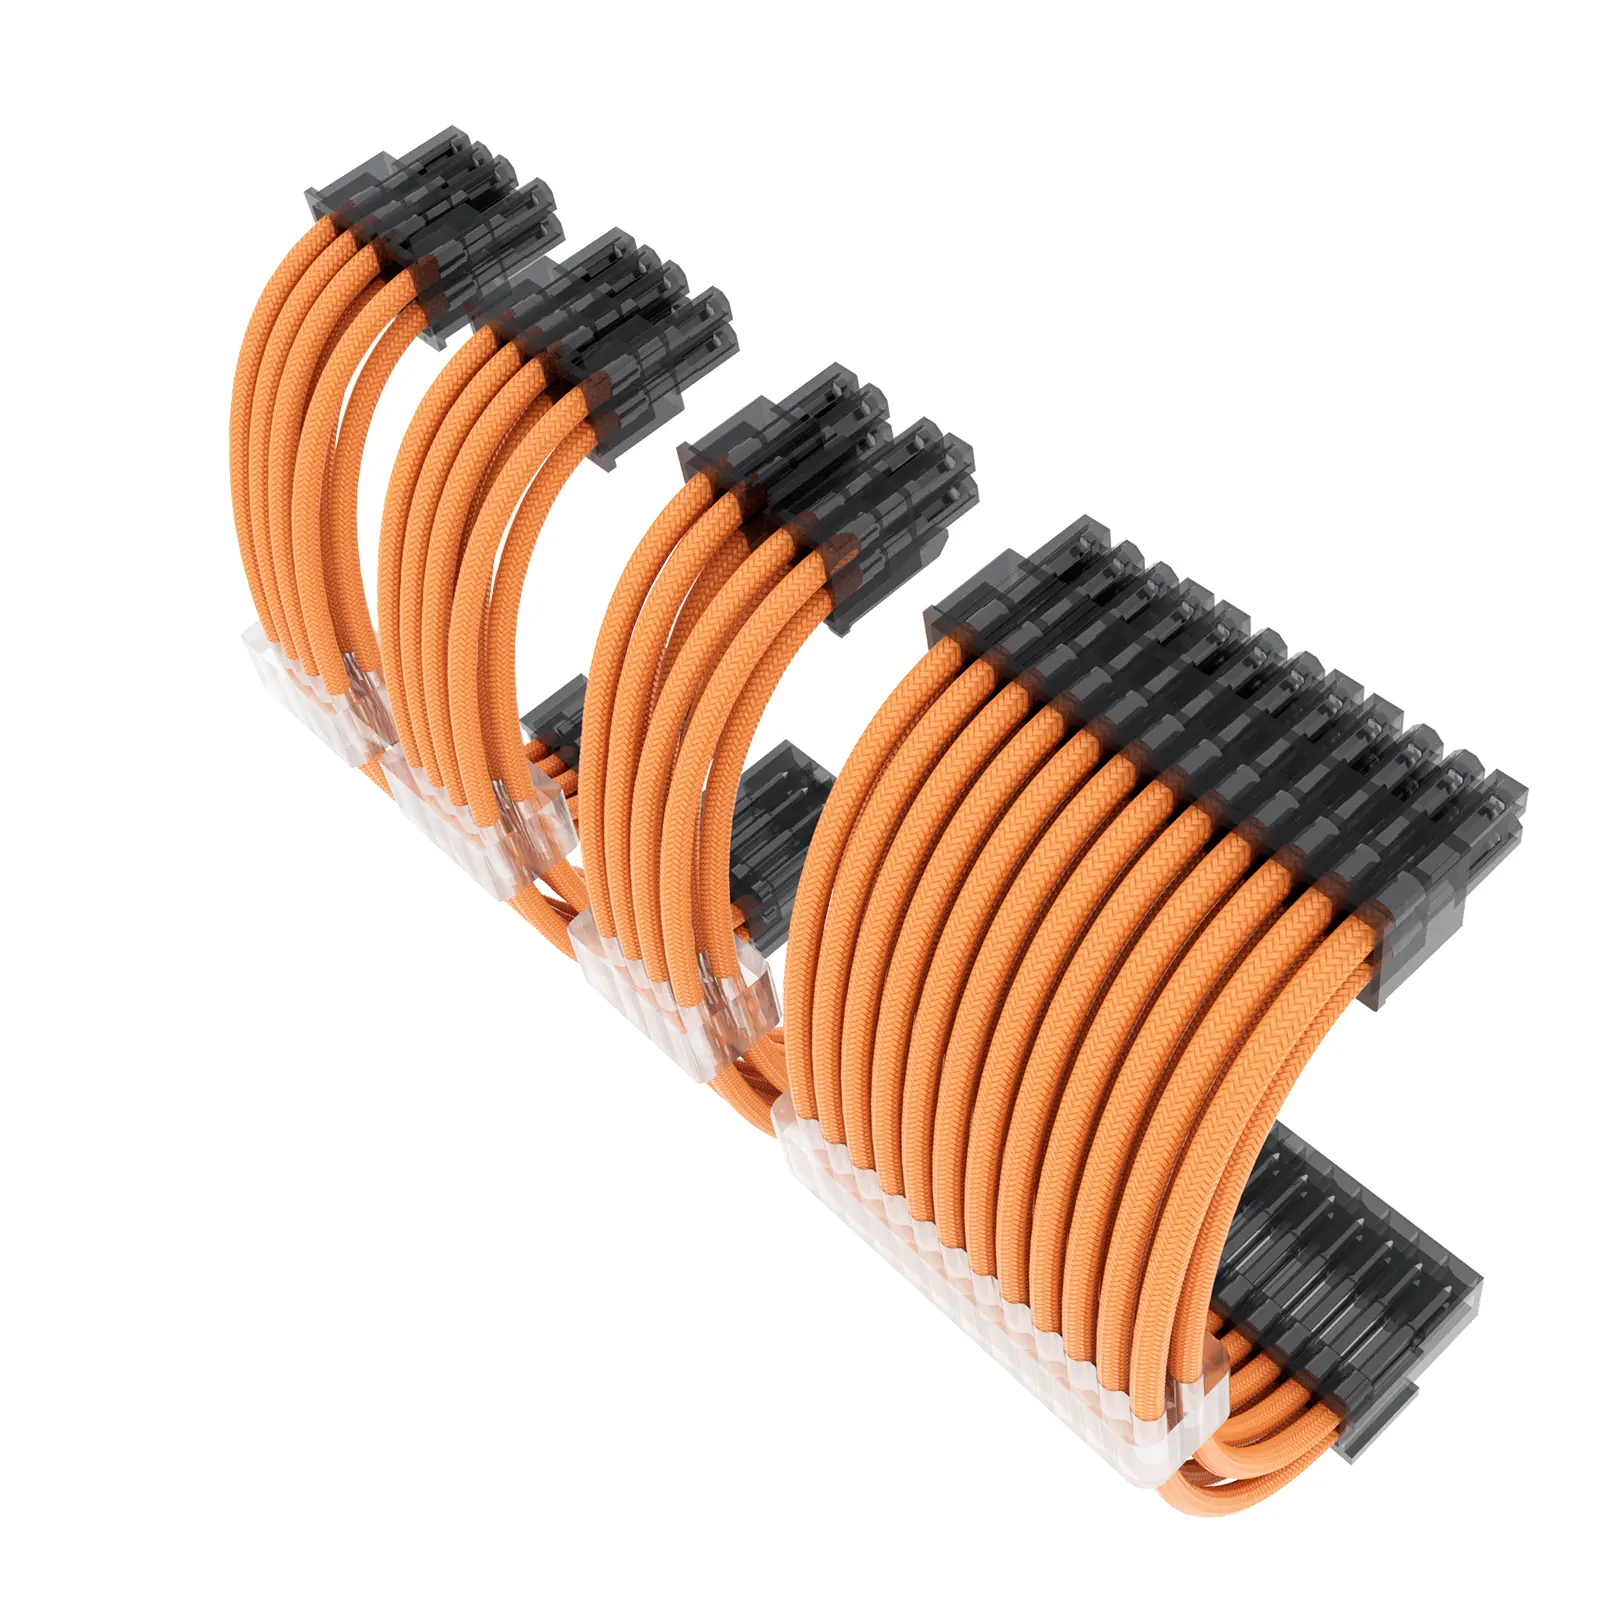 Power Supply Psu Extension Braided Sleeved Computer Power Cord Power Cable Orange+pink+black Red+gray Black+black White Kits